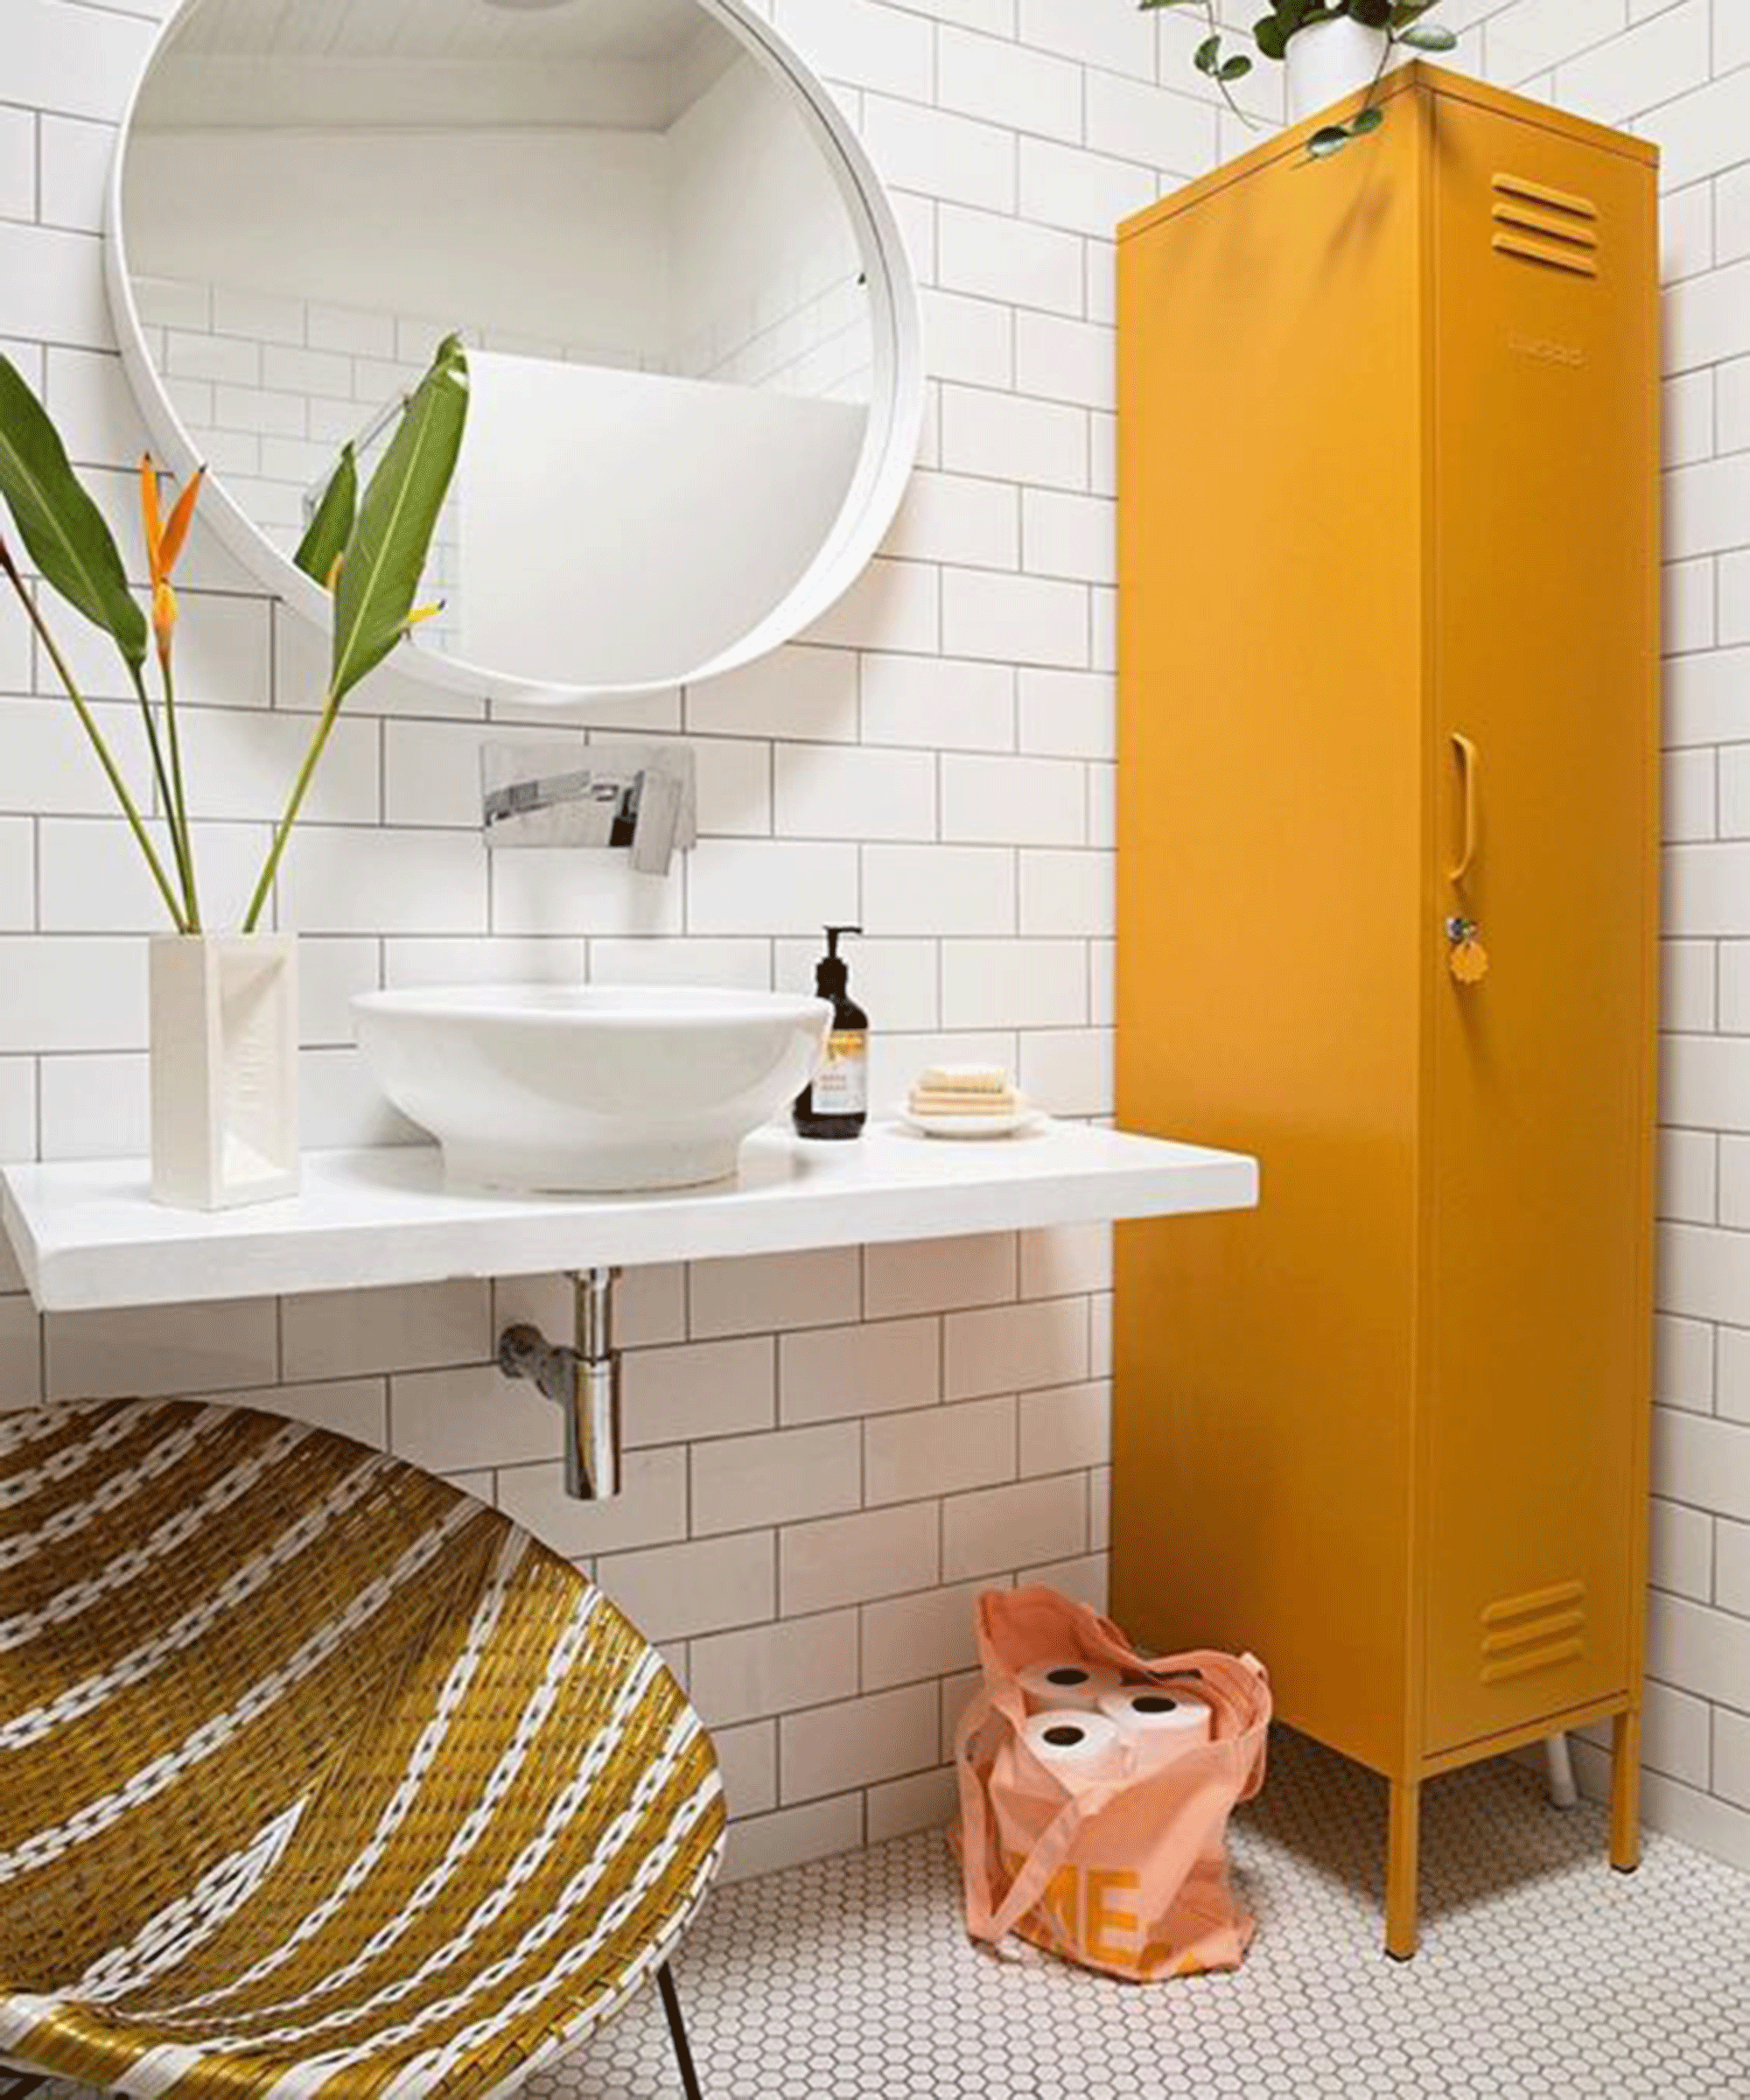 Bright yellow bathroom cabinet in white tiled bathroom with wall mirror and woven chair